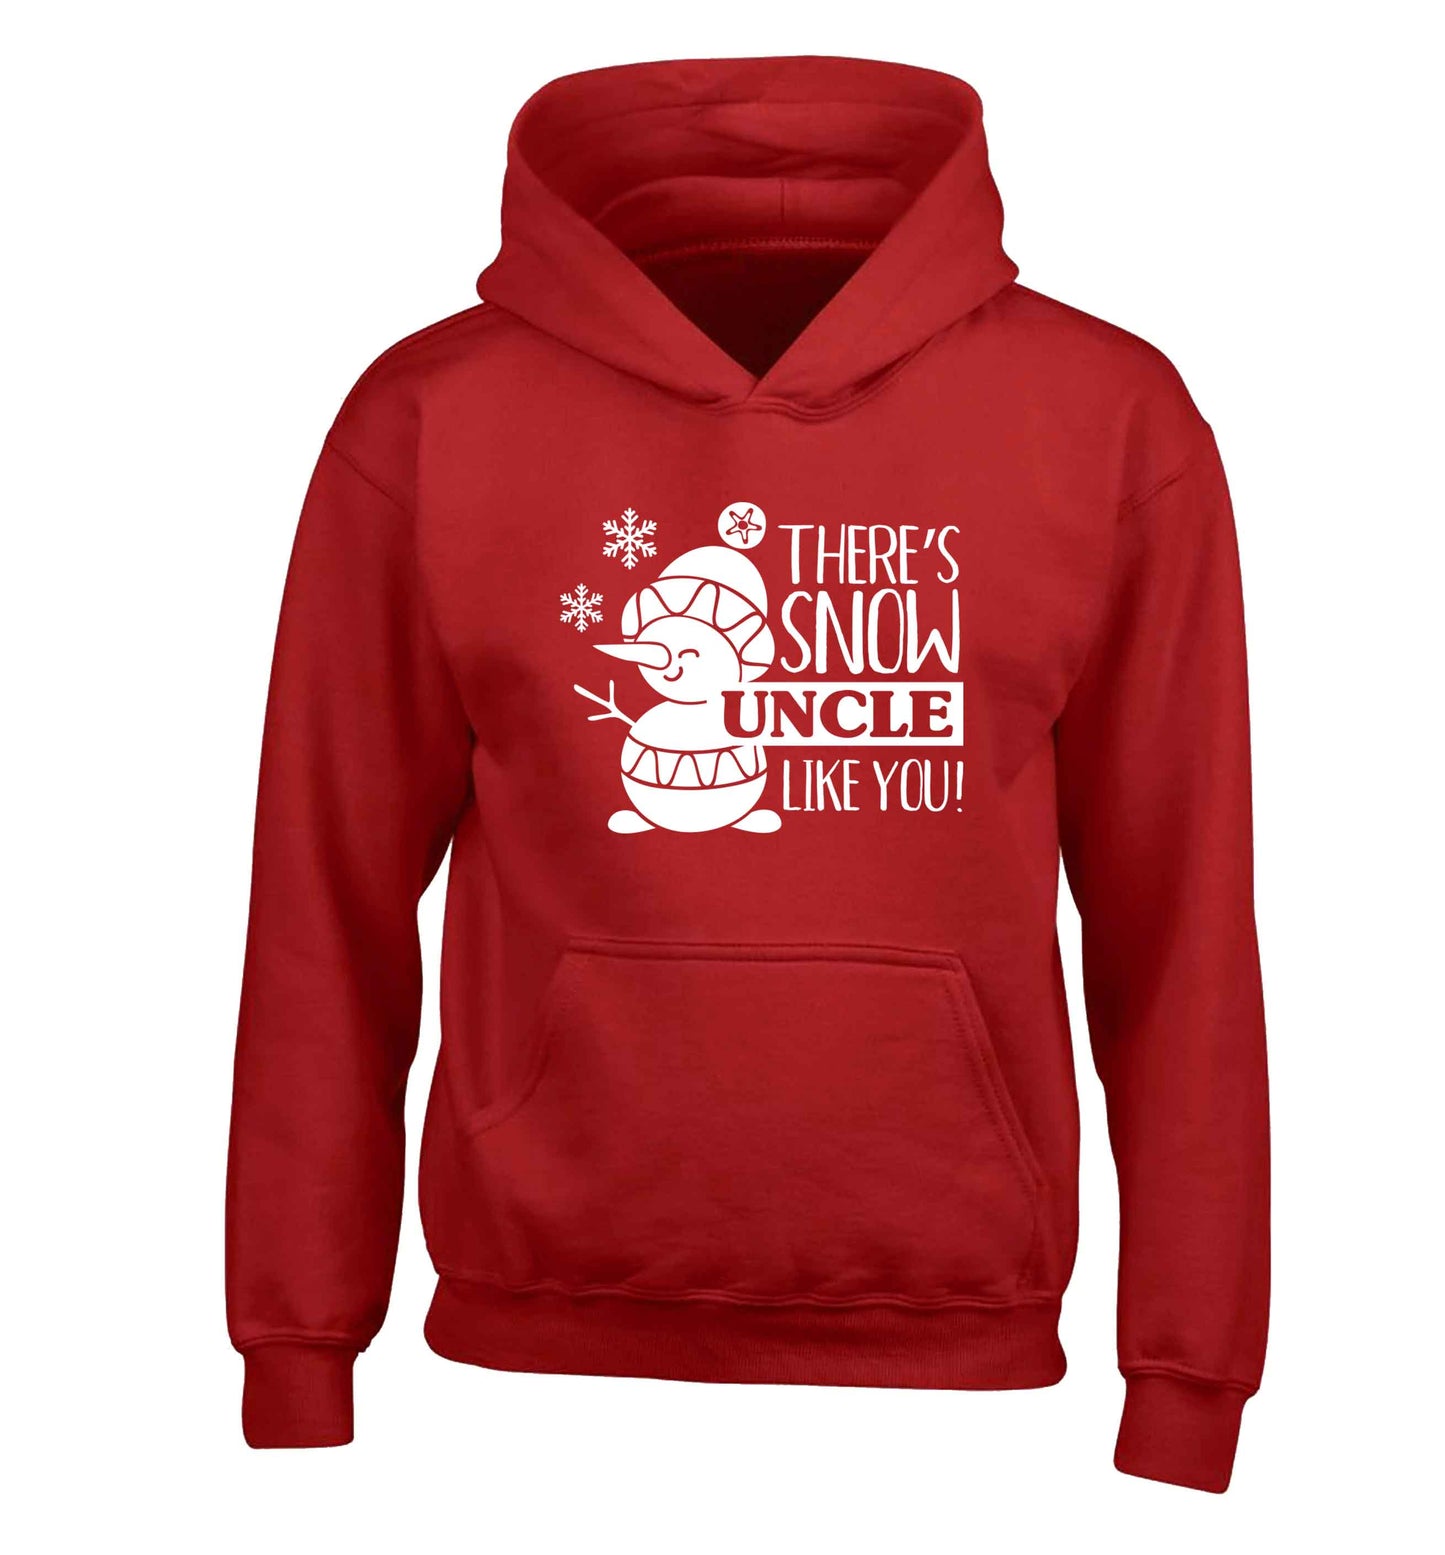 There's snow uncle like you children's red hoodie 12-13 Years